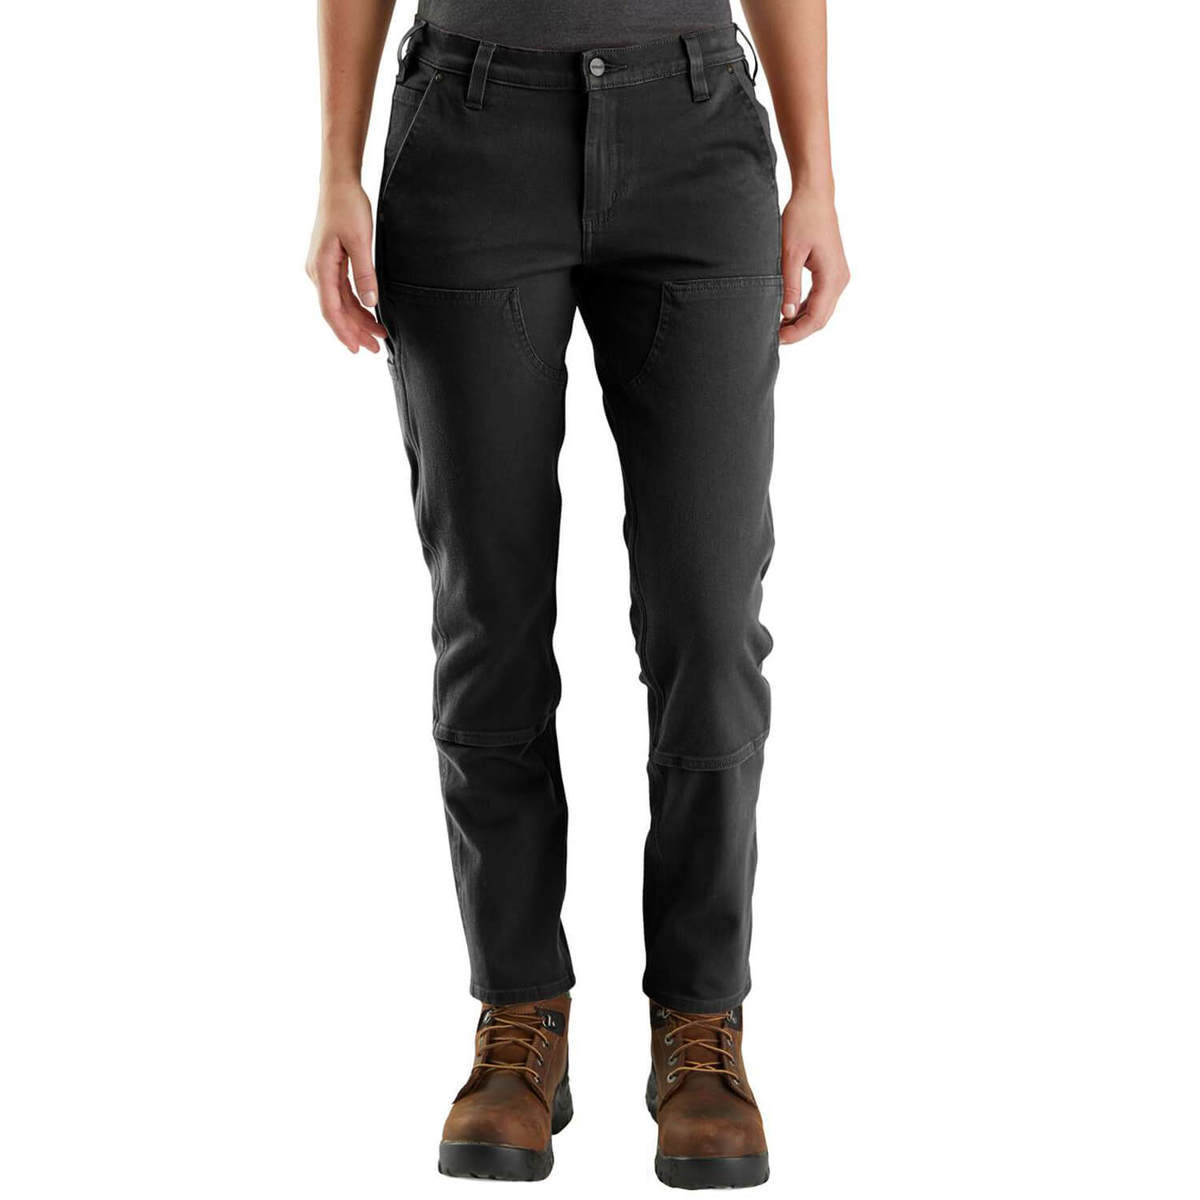 Carhartt Women's Twill Double Front Mid Rise Work Pants - Black